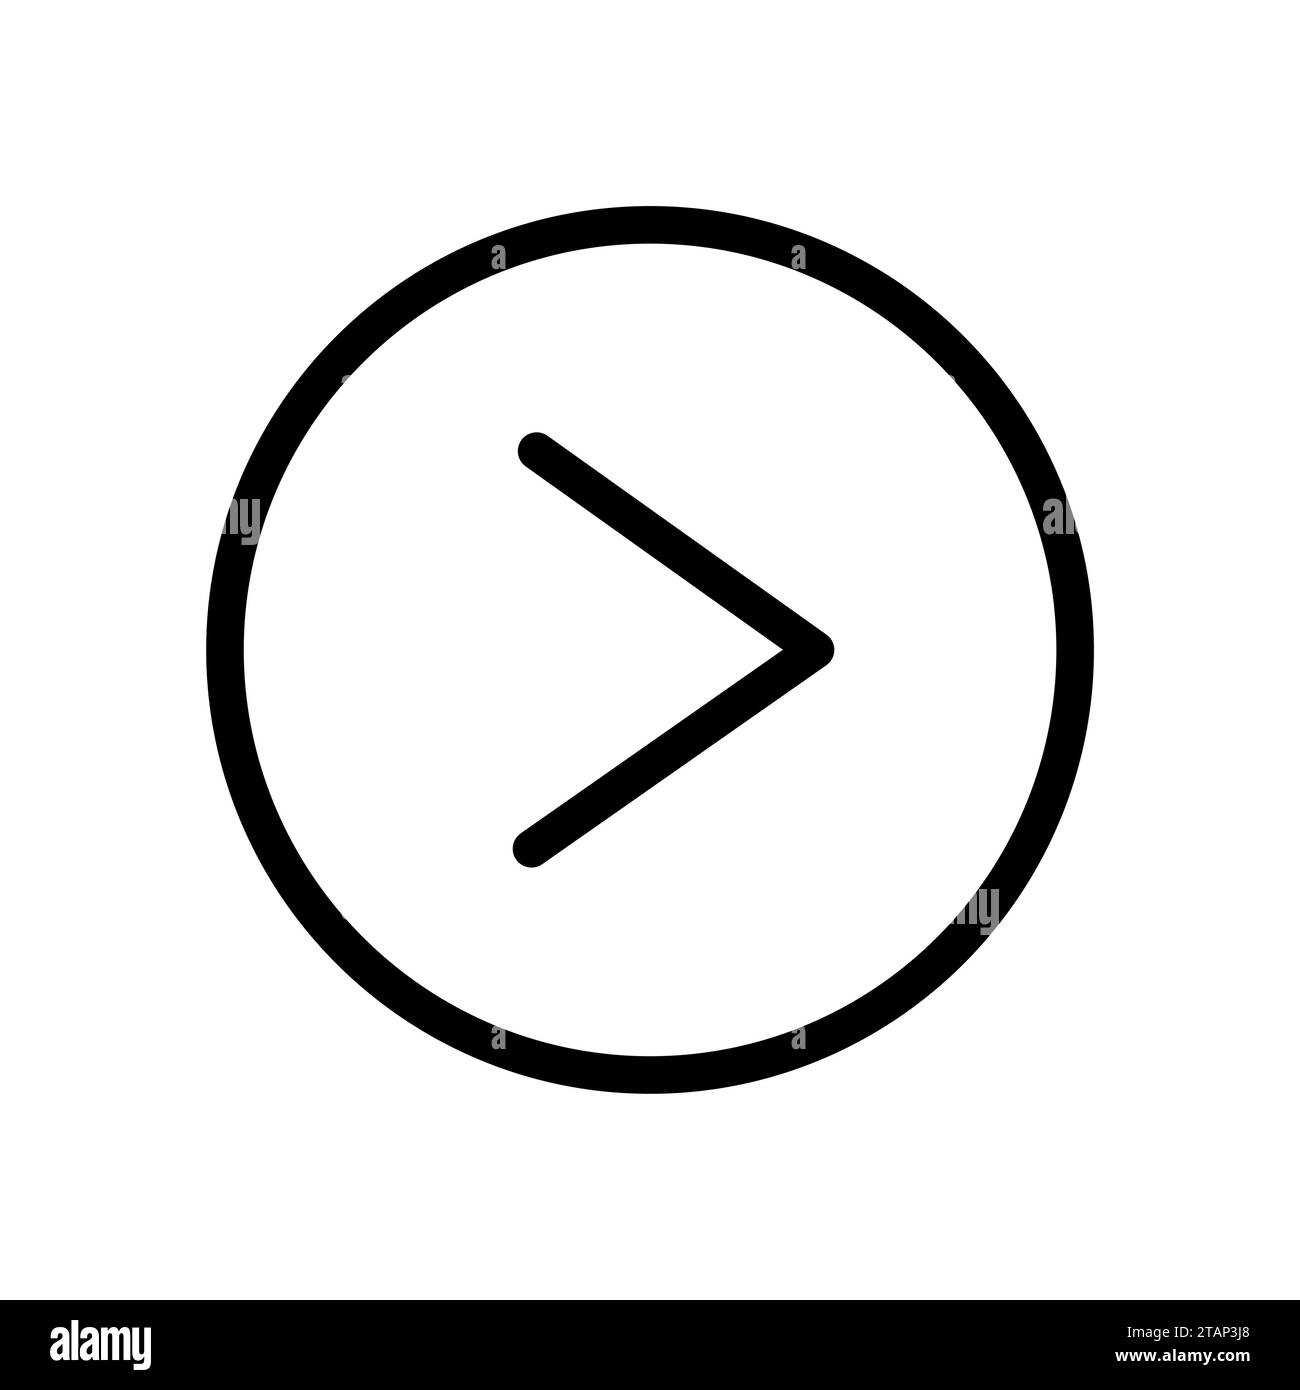 Vector line icon arrow right provide clear direction and navigation cues. Next icon in the application interface indicates the progression of a task. Stock Vector